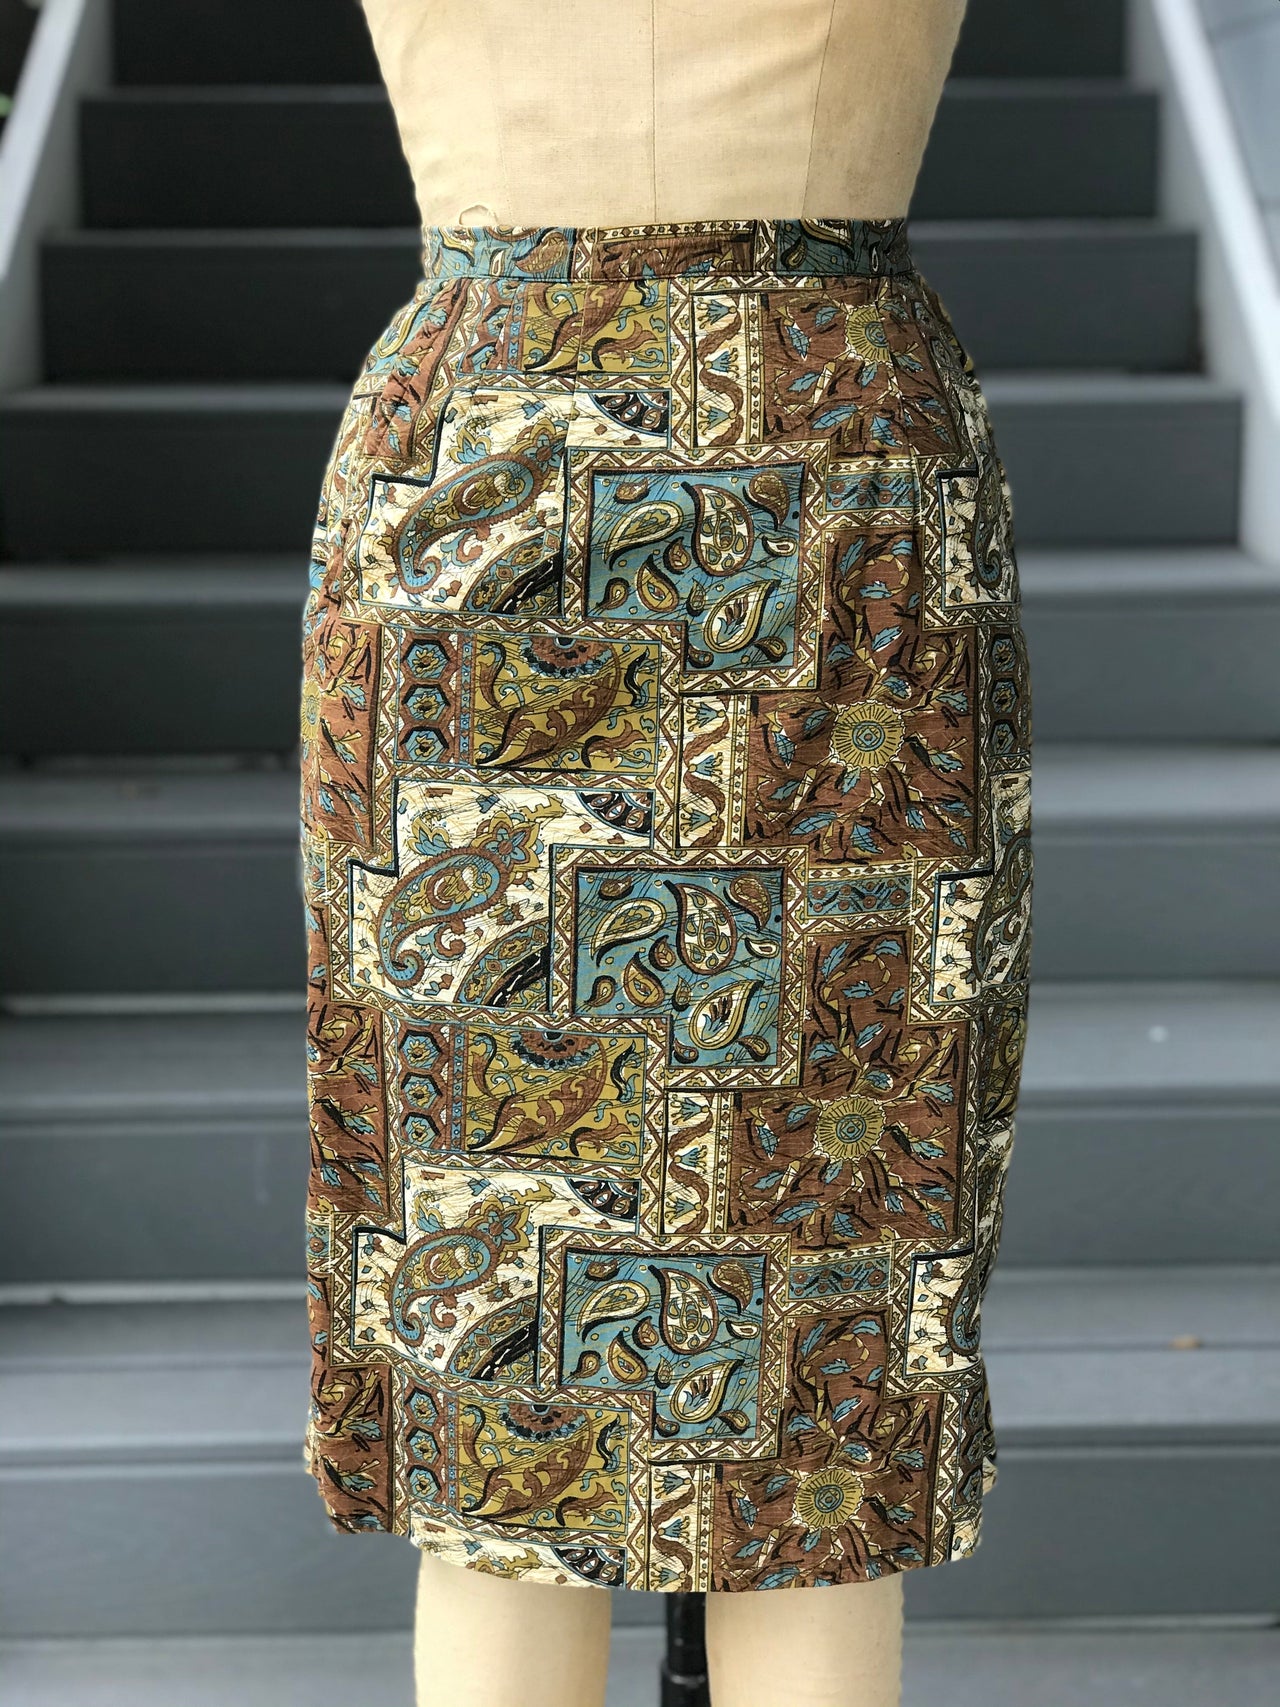 1950s Tiki Pencil Skirt Skirt or Pant Bloomers and Frocks 